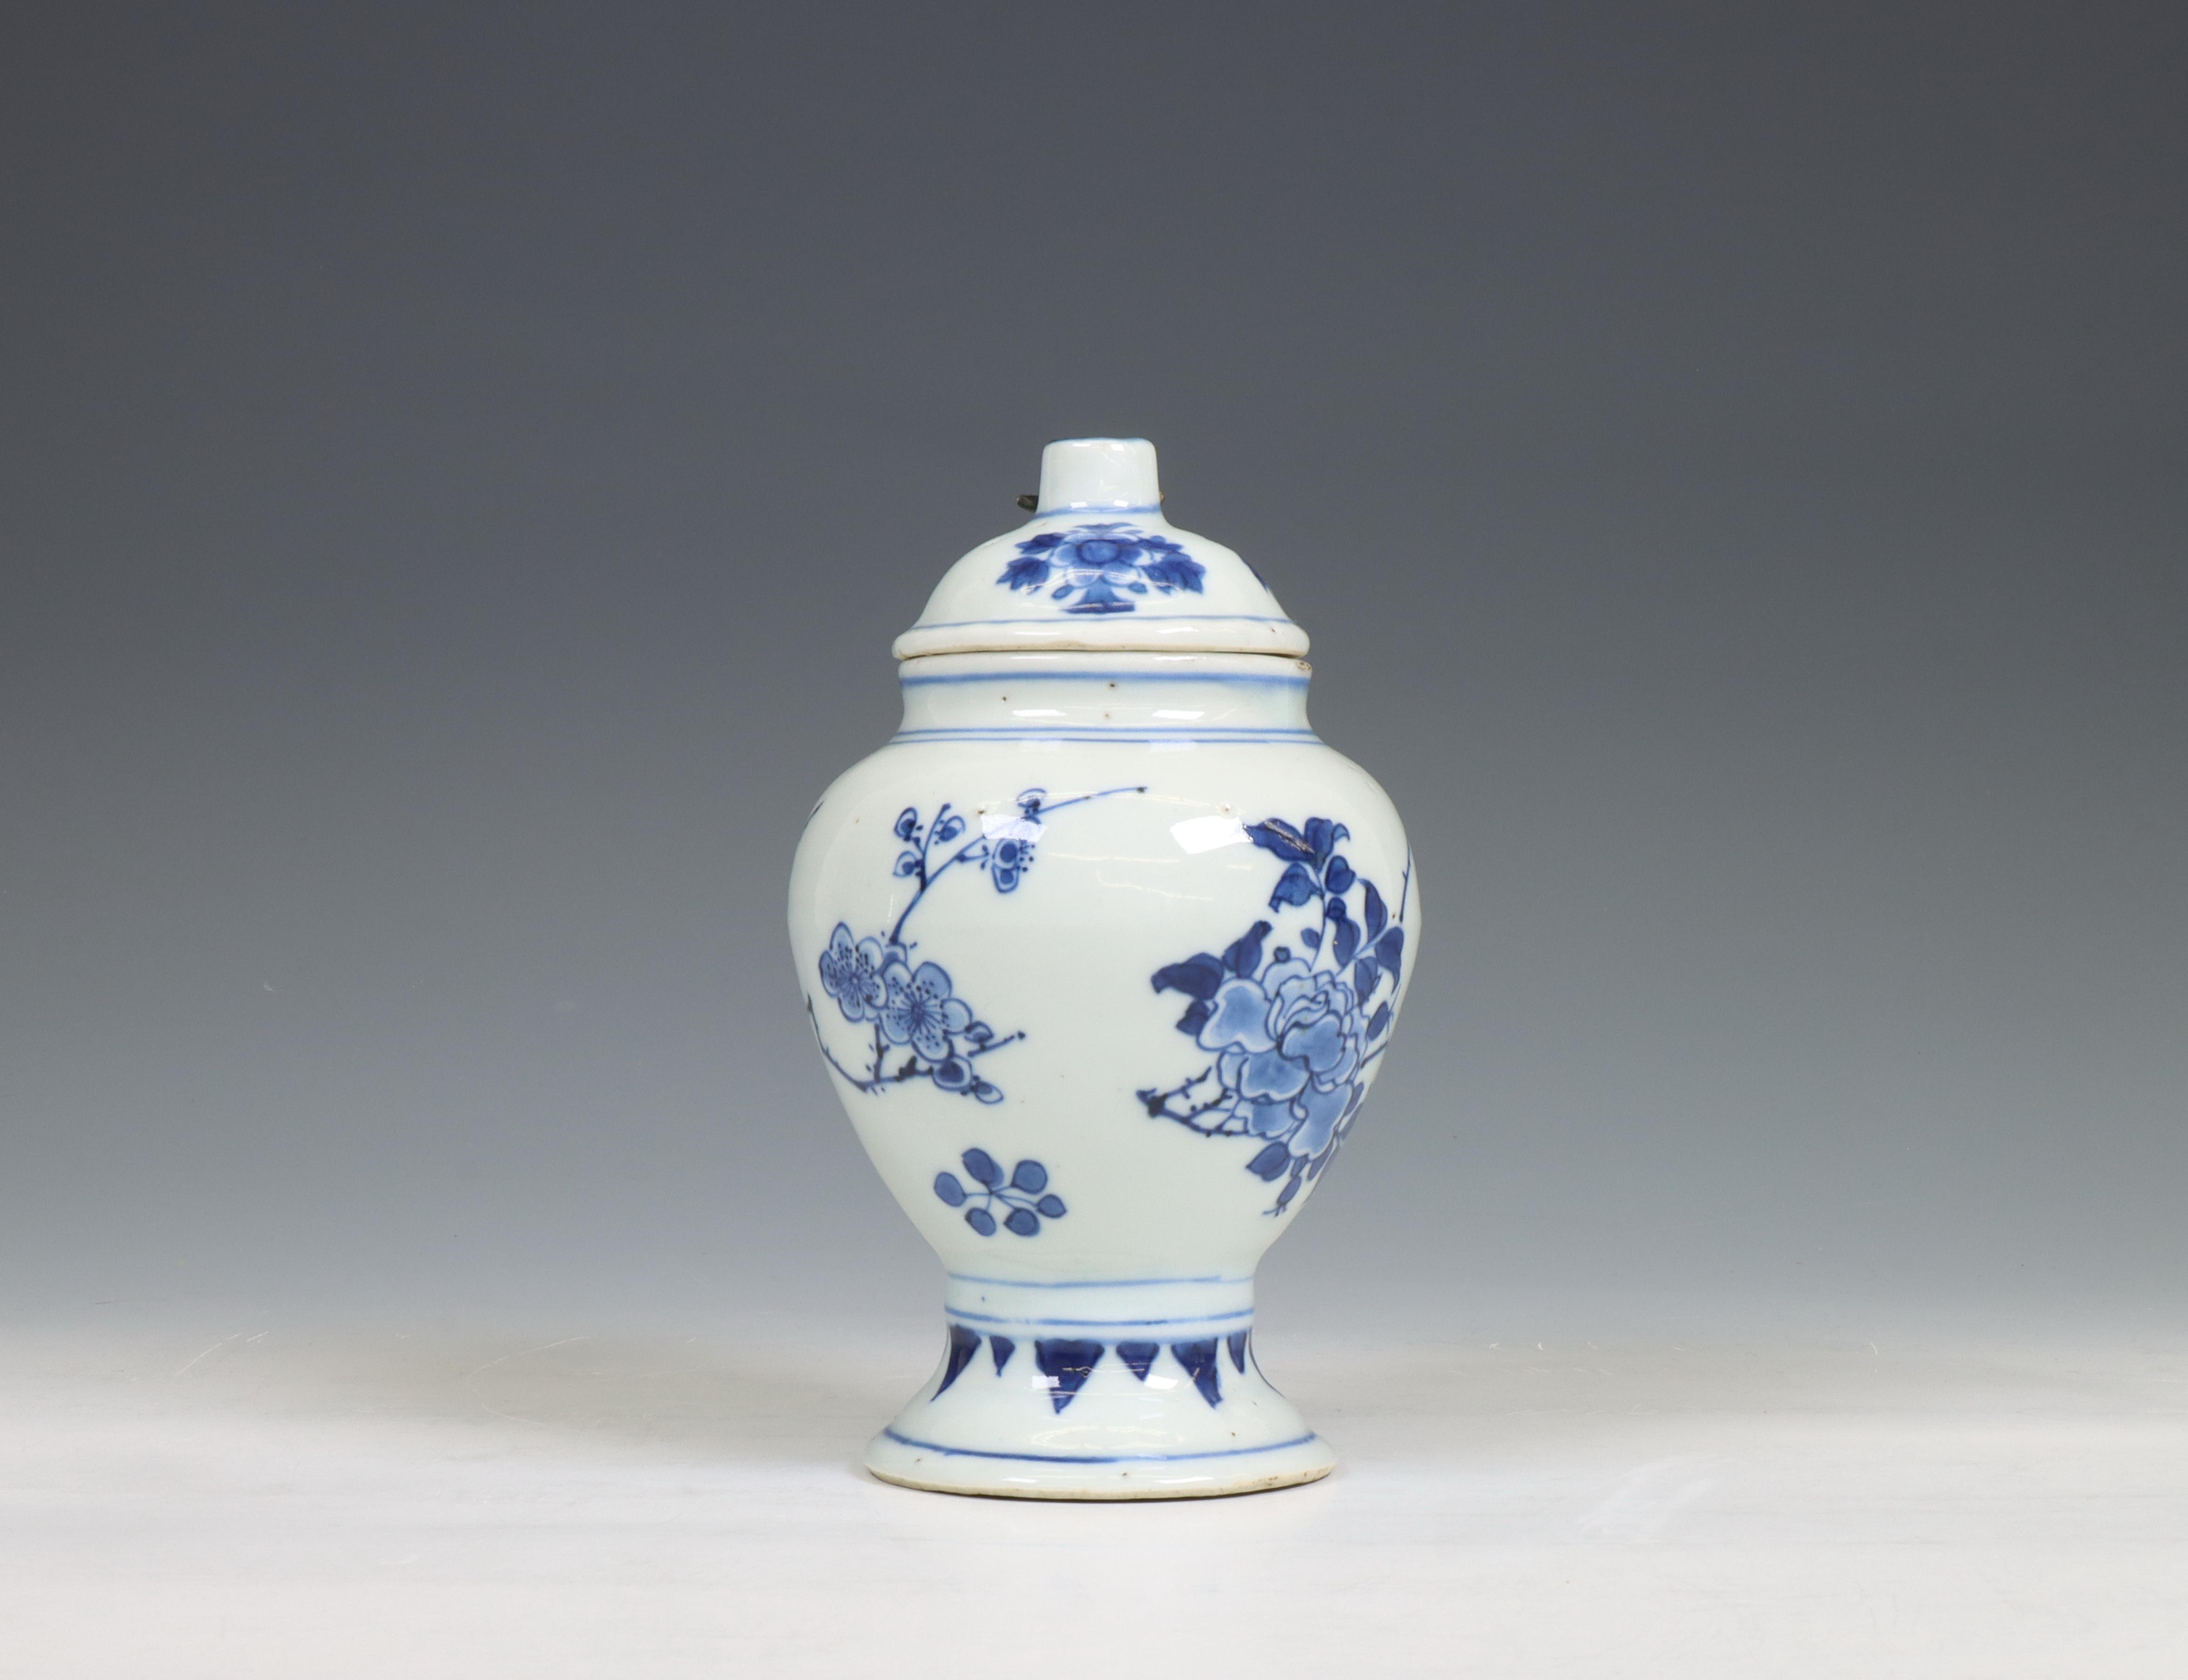 China, a Transitional silver-mounted blue and white mustard-pot and associated cover, mid 17th centu - Image 3 of 6